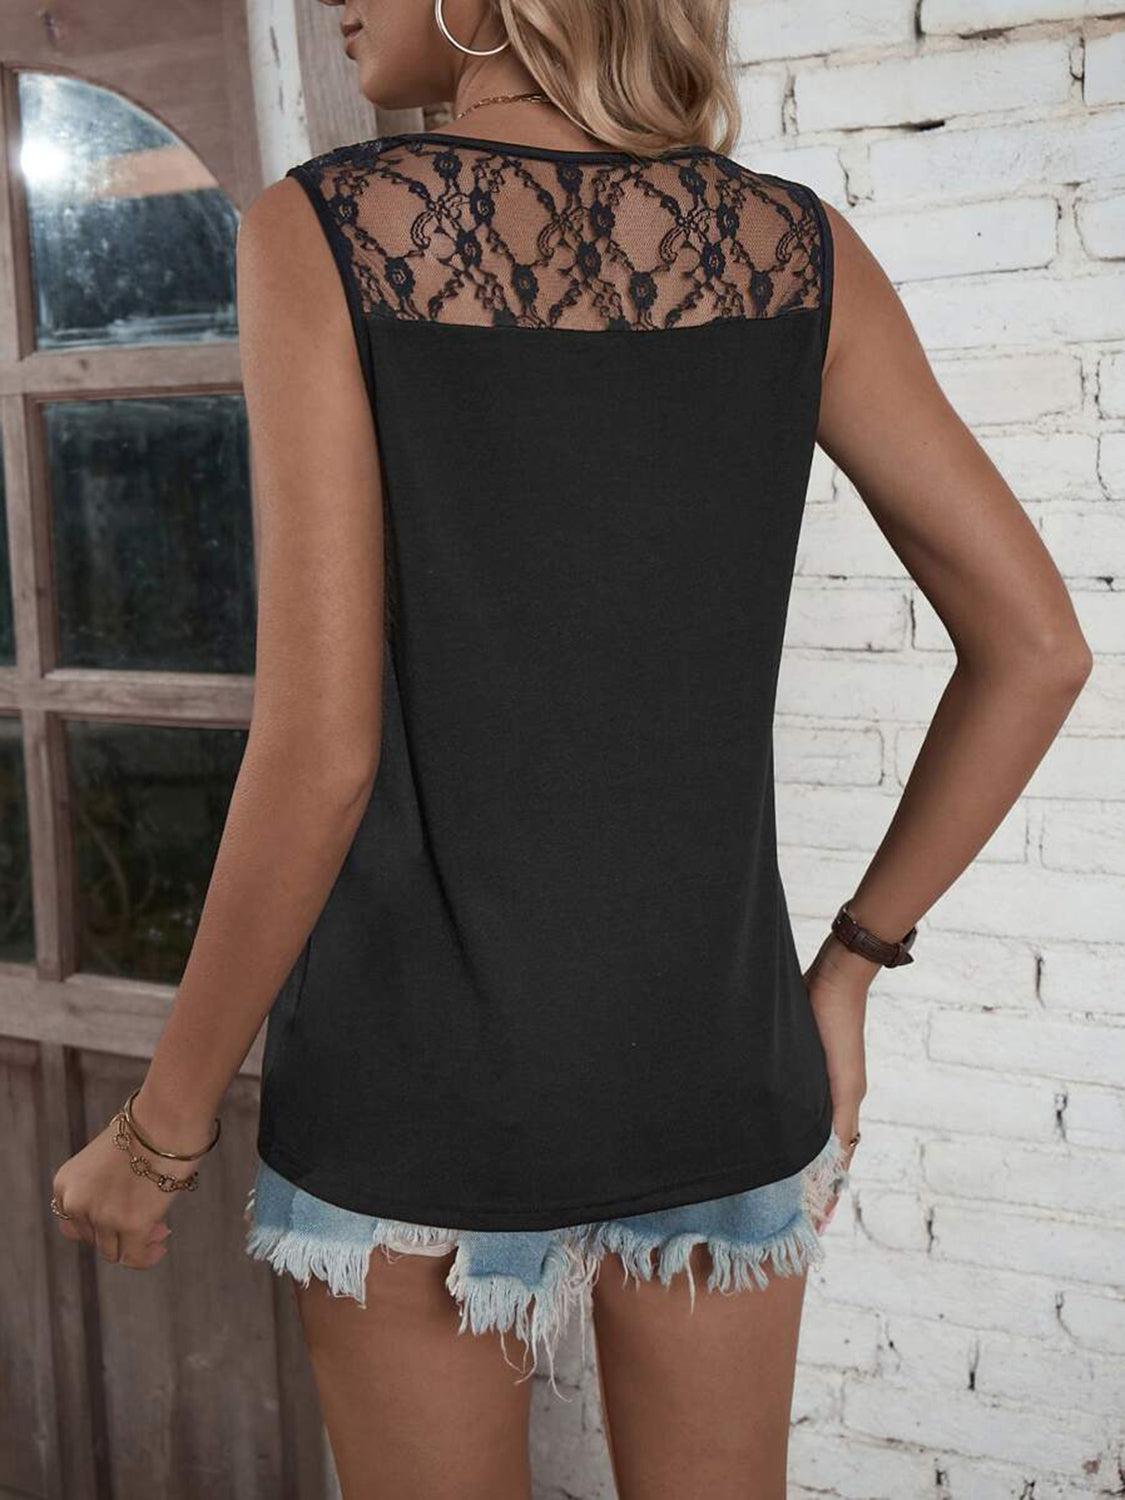 a woman wearing a black top with a lace back